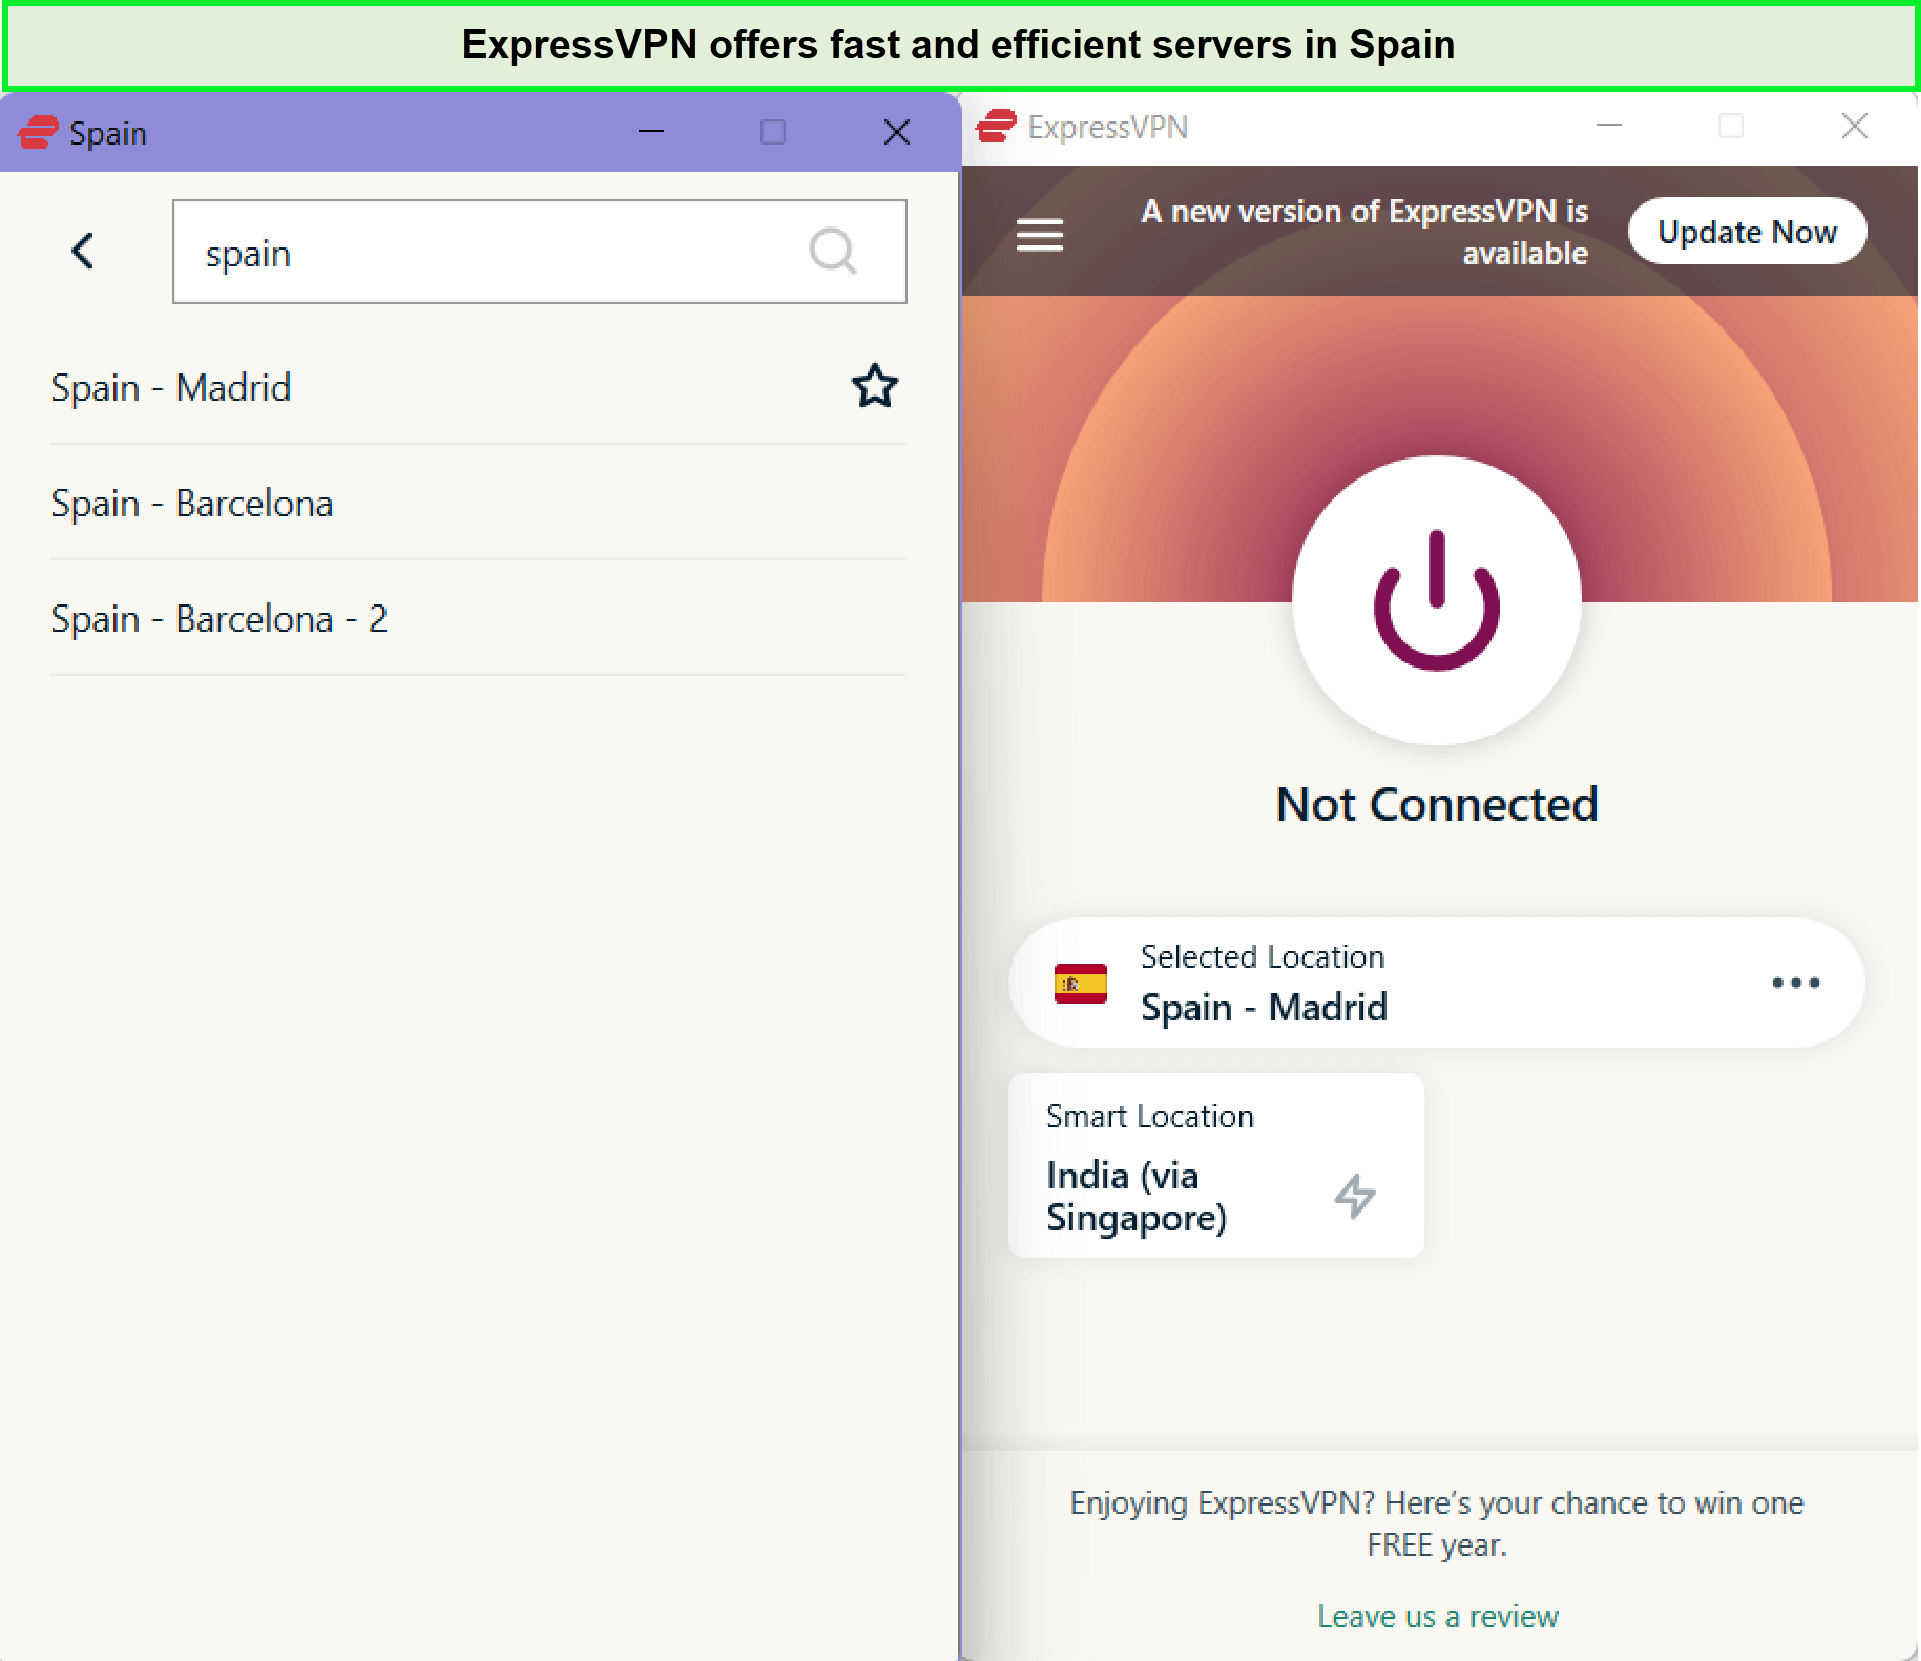 expressvpn-spain-server-to-get-a-spanish-ip-address-in-Italy